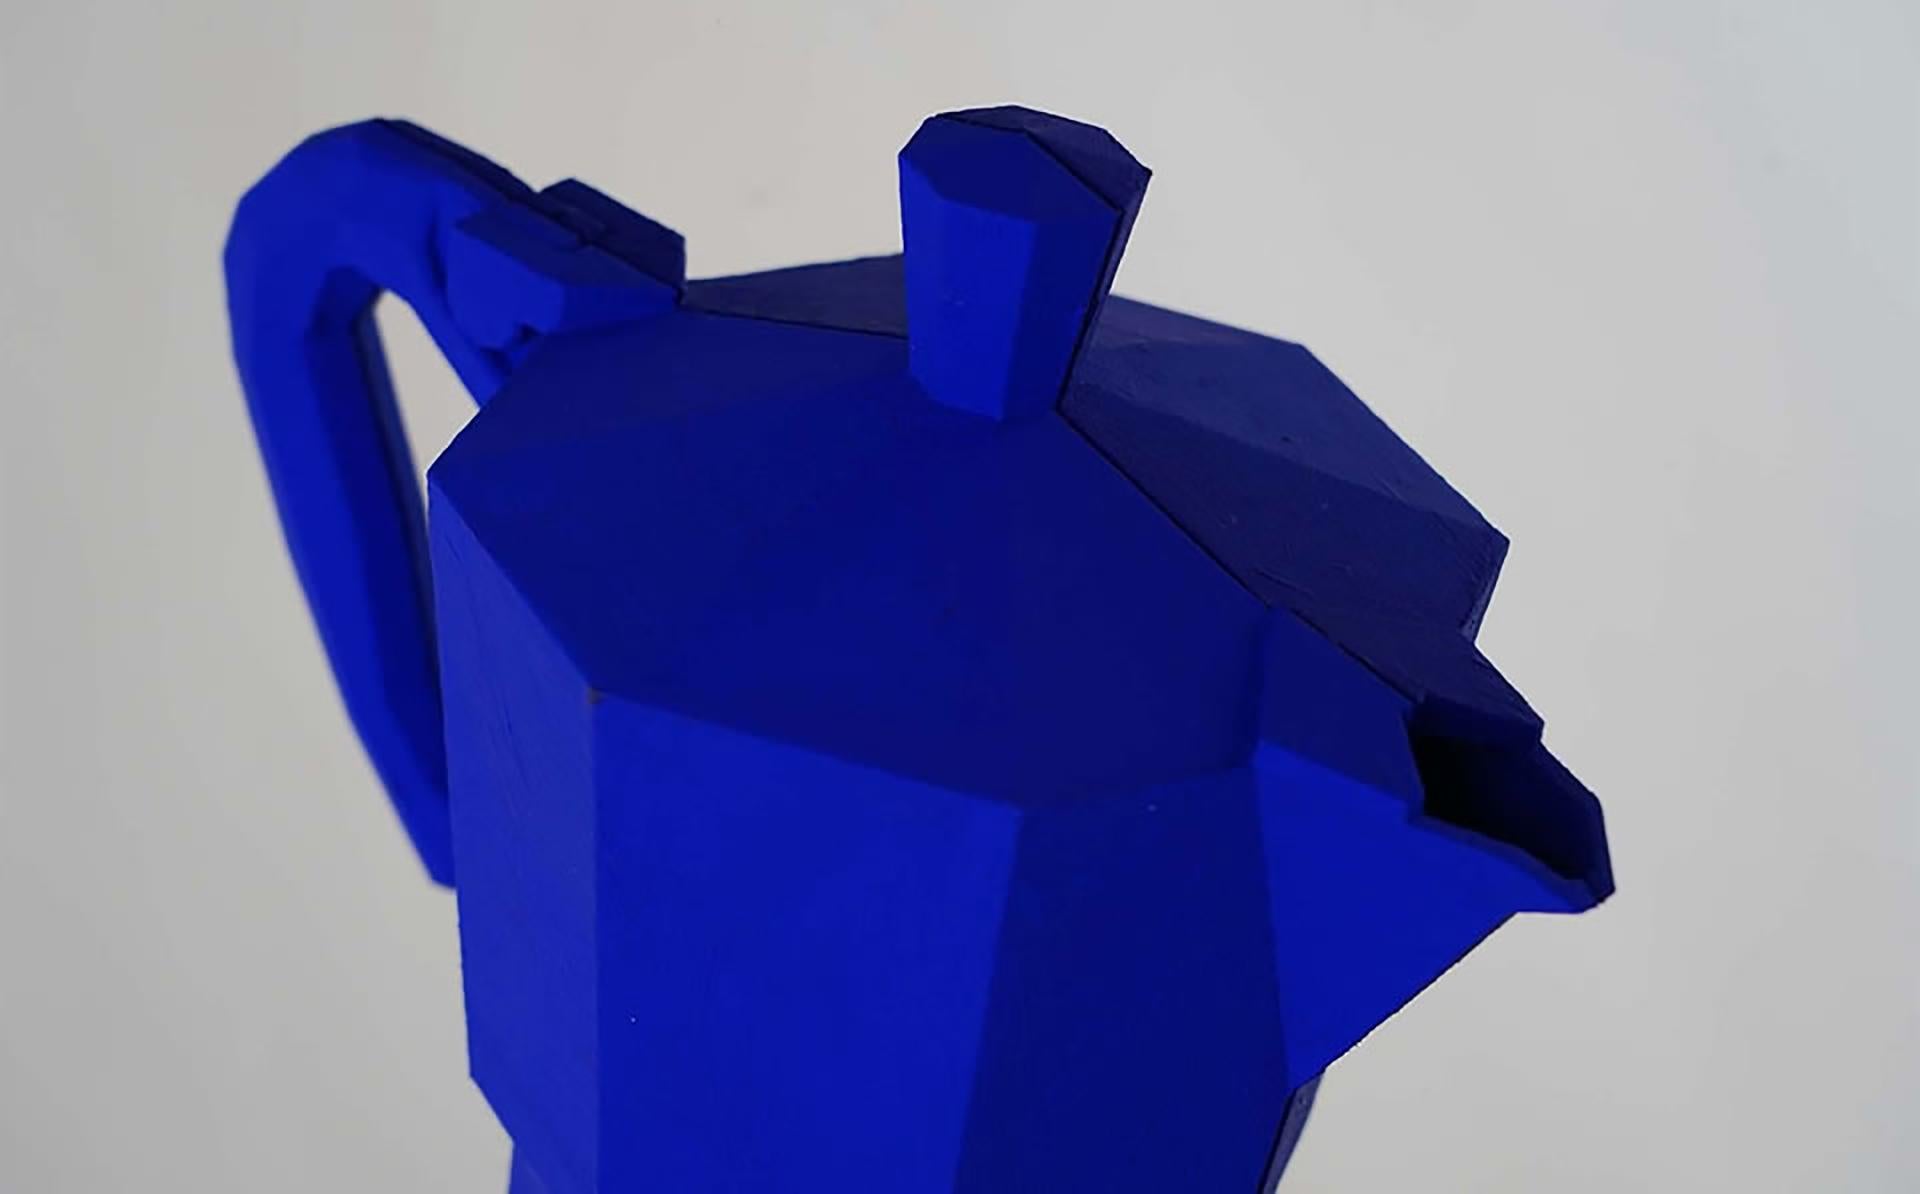 TITLE: Moka moi pas!
ARTIST: Daniele Basso
YEAR: 2022
MEDIUM TYPE: Sculpture
MEDIUM/MATERIALS: Blue resin and stainless steel mirror finish by hands
DIMENSIONS: 50 x 50 cm

Simple but brilliant. Unchanged over time. 
Moka is an icon of Italy. That